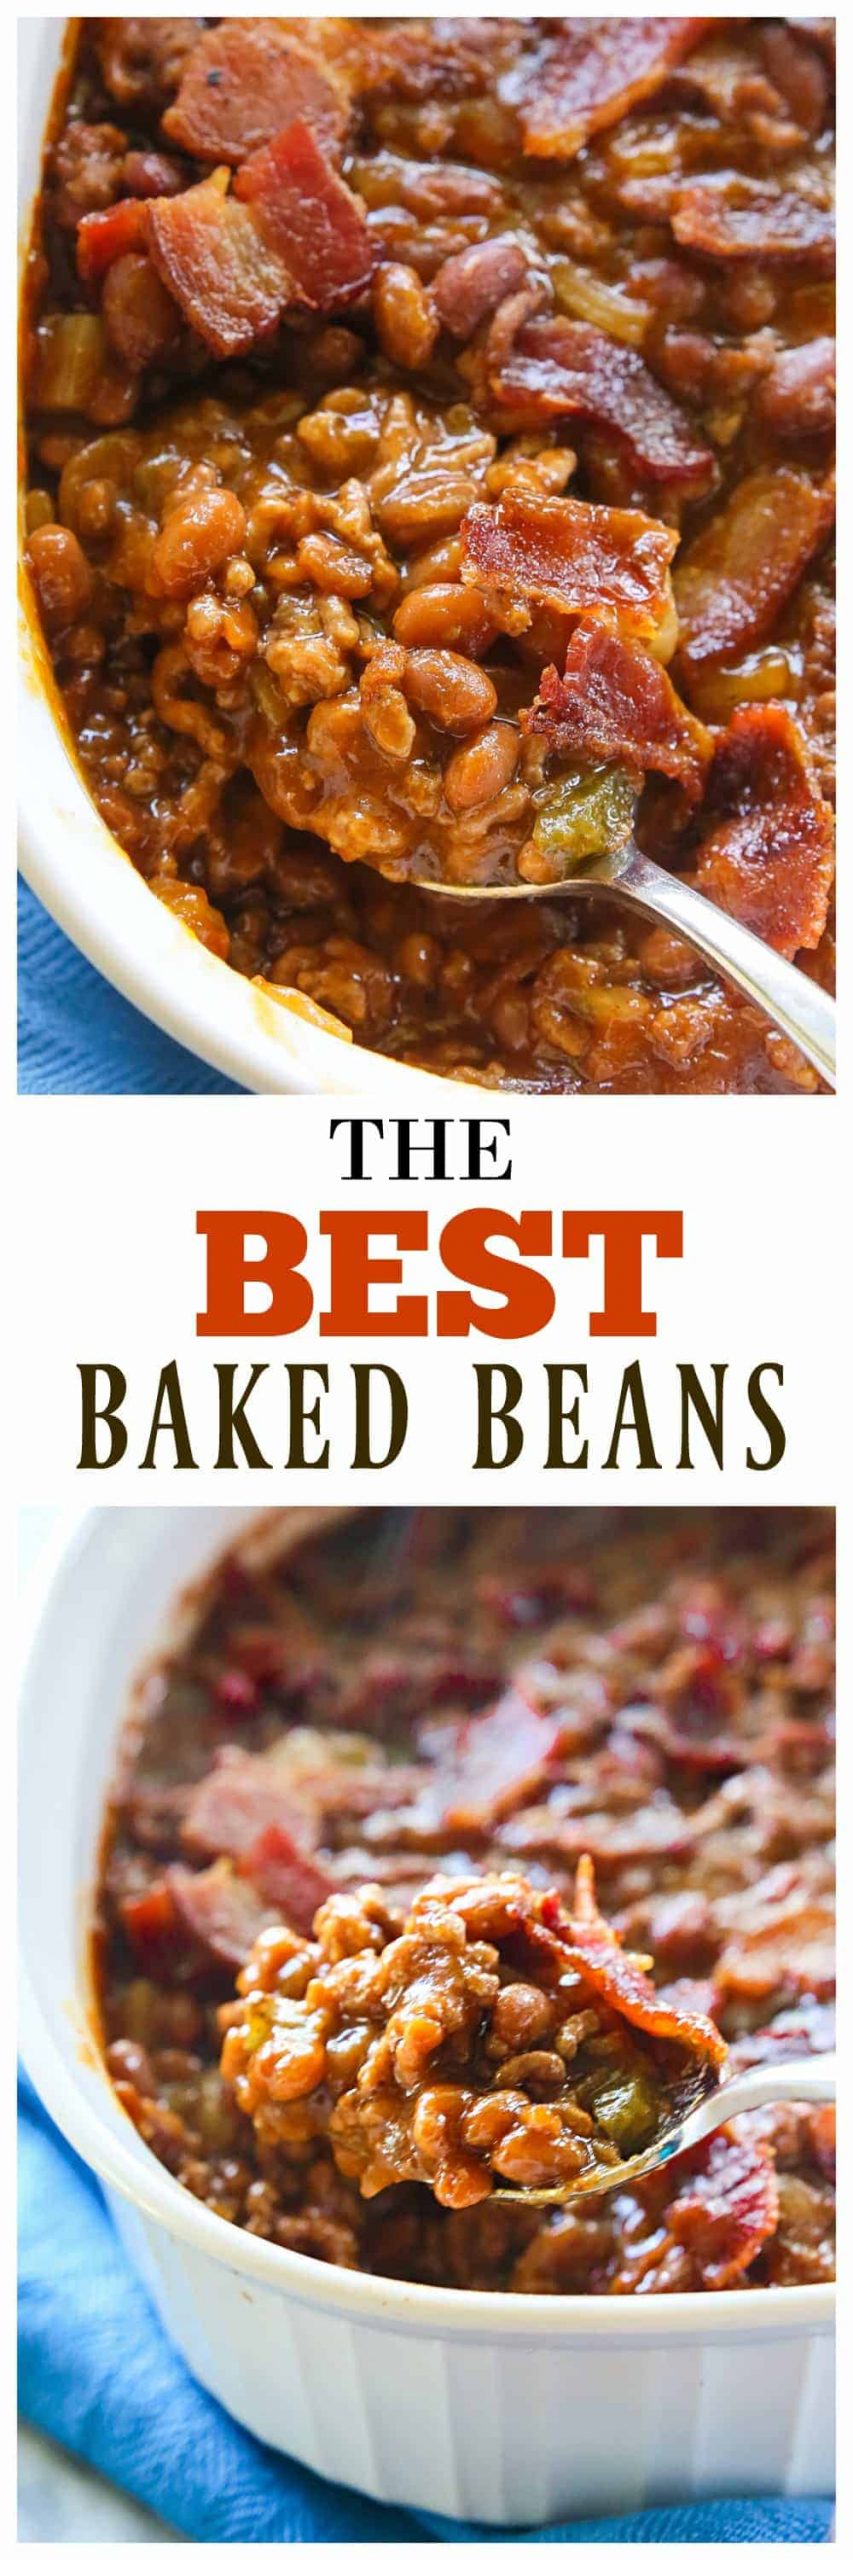 fb image scaled - The Best Baked Beans